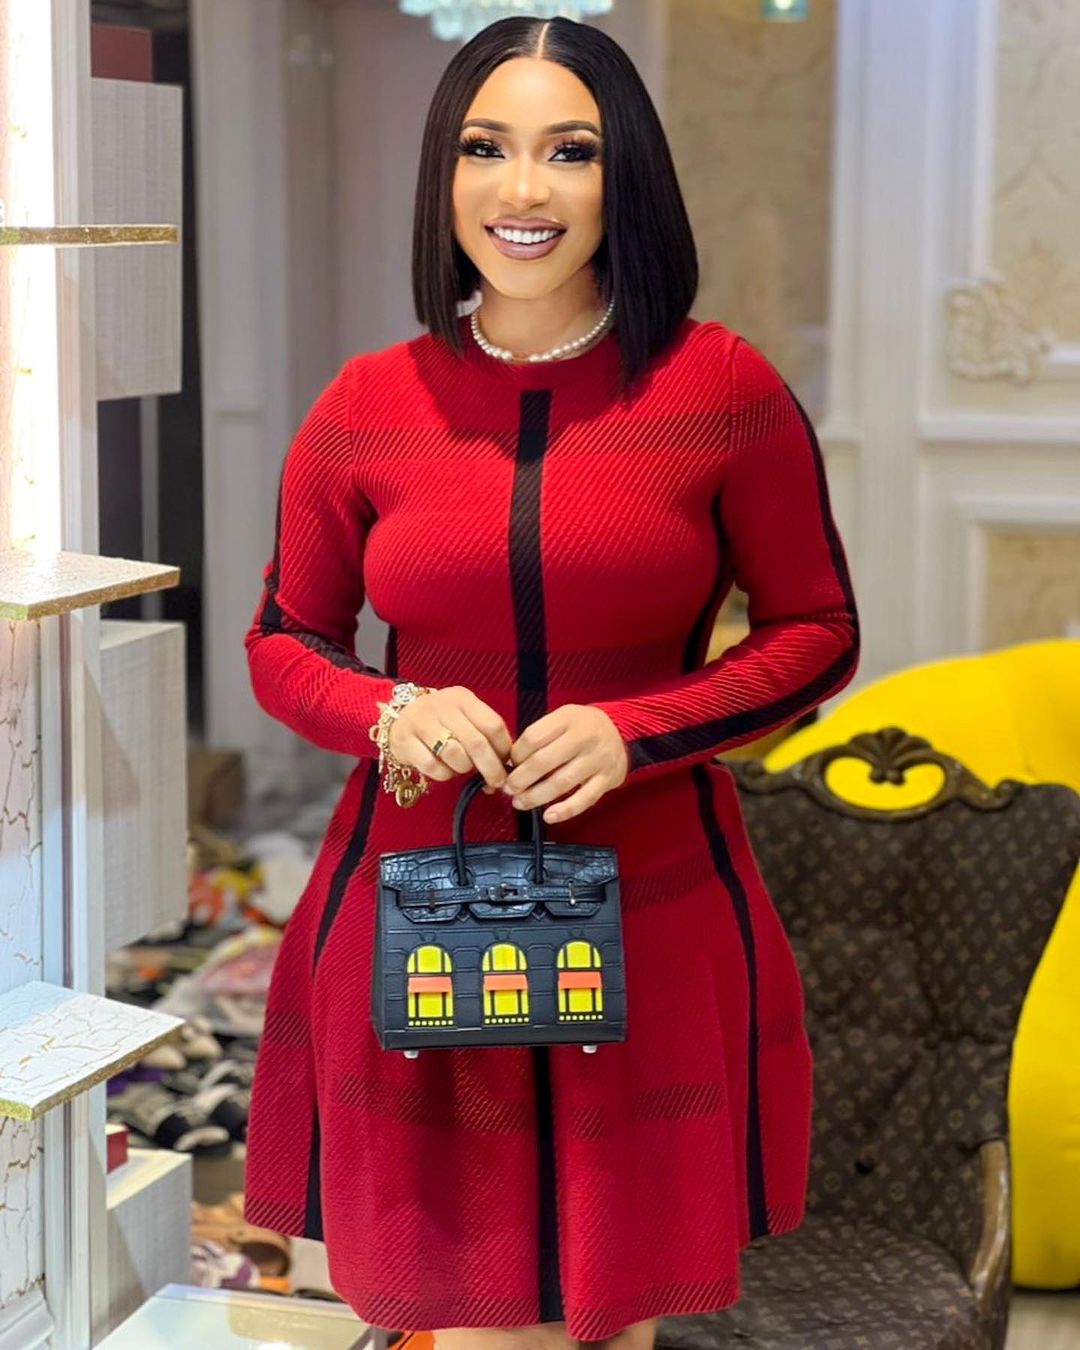 "Why its hard to believe Mohbad's Father" -- Tonto Dikeh